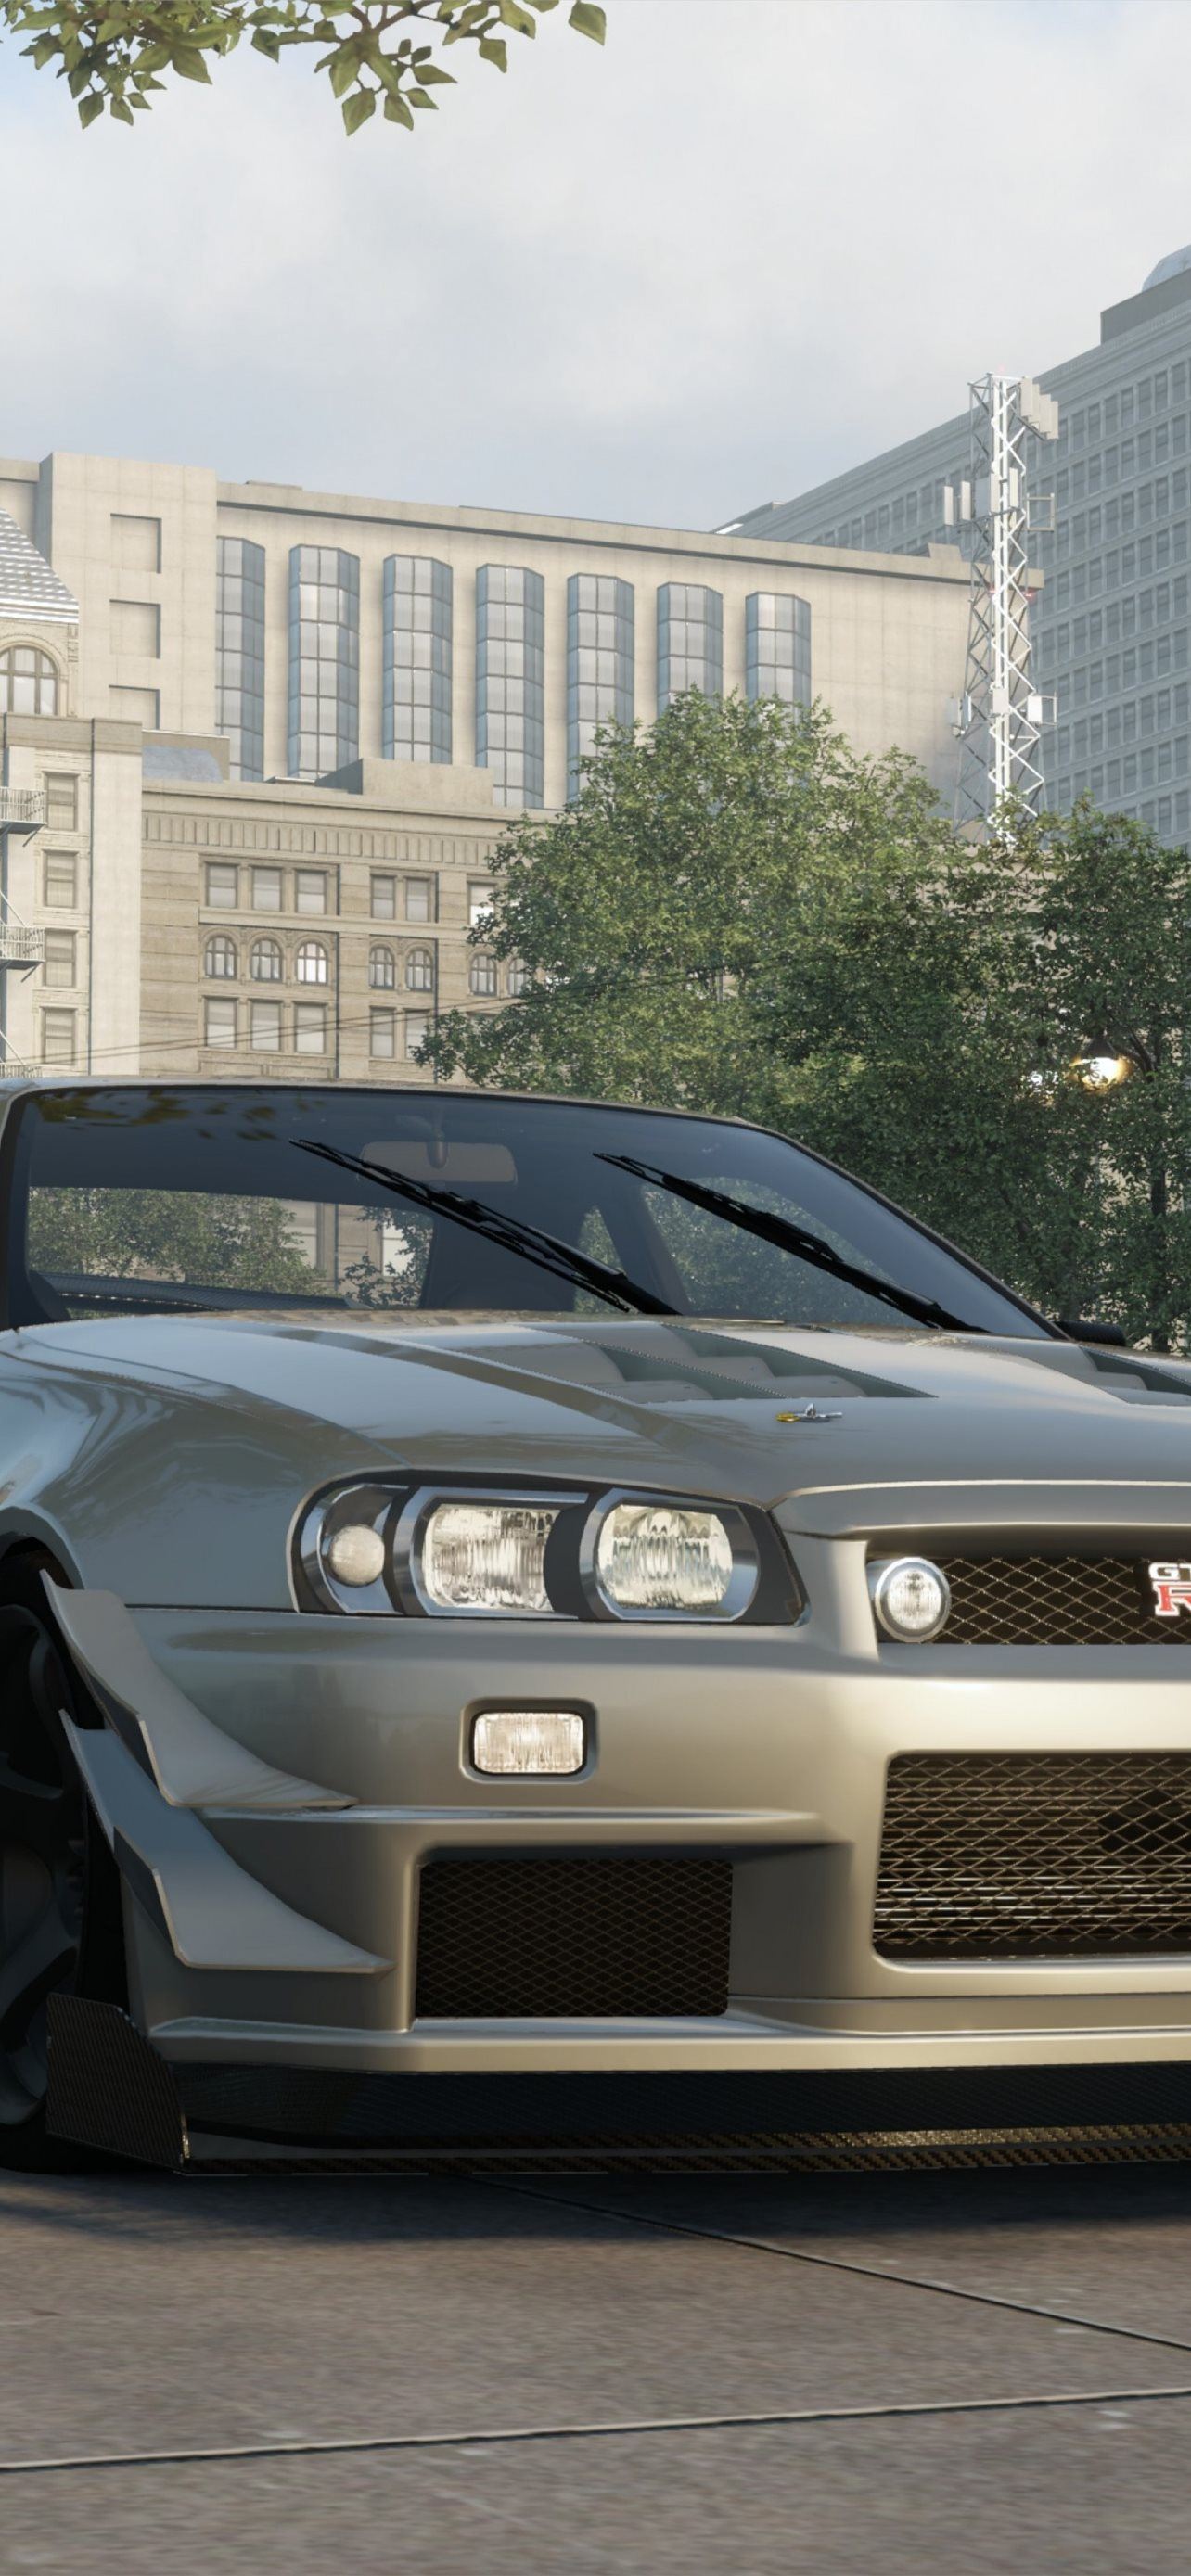 Skyline R34 wallpapers by elbarakat  Android Apps  AppAgg